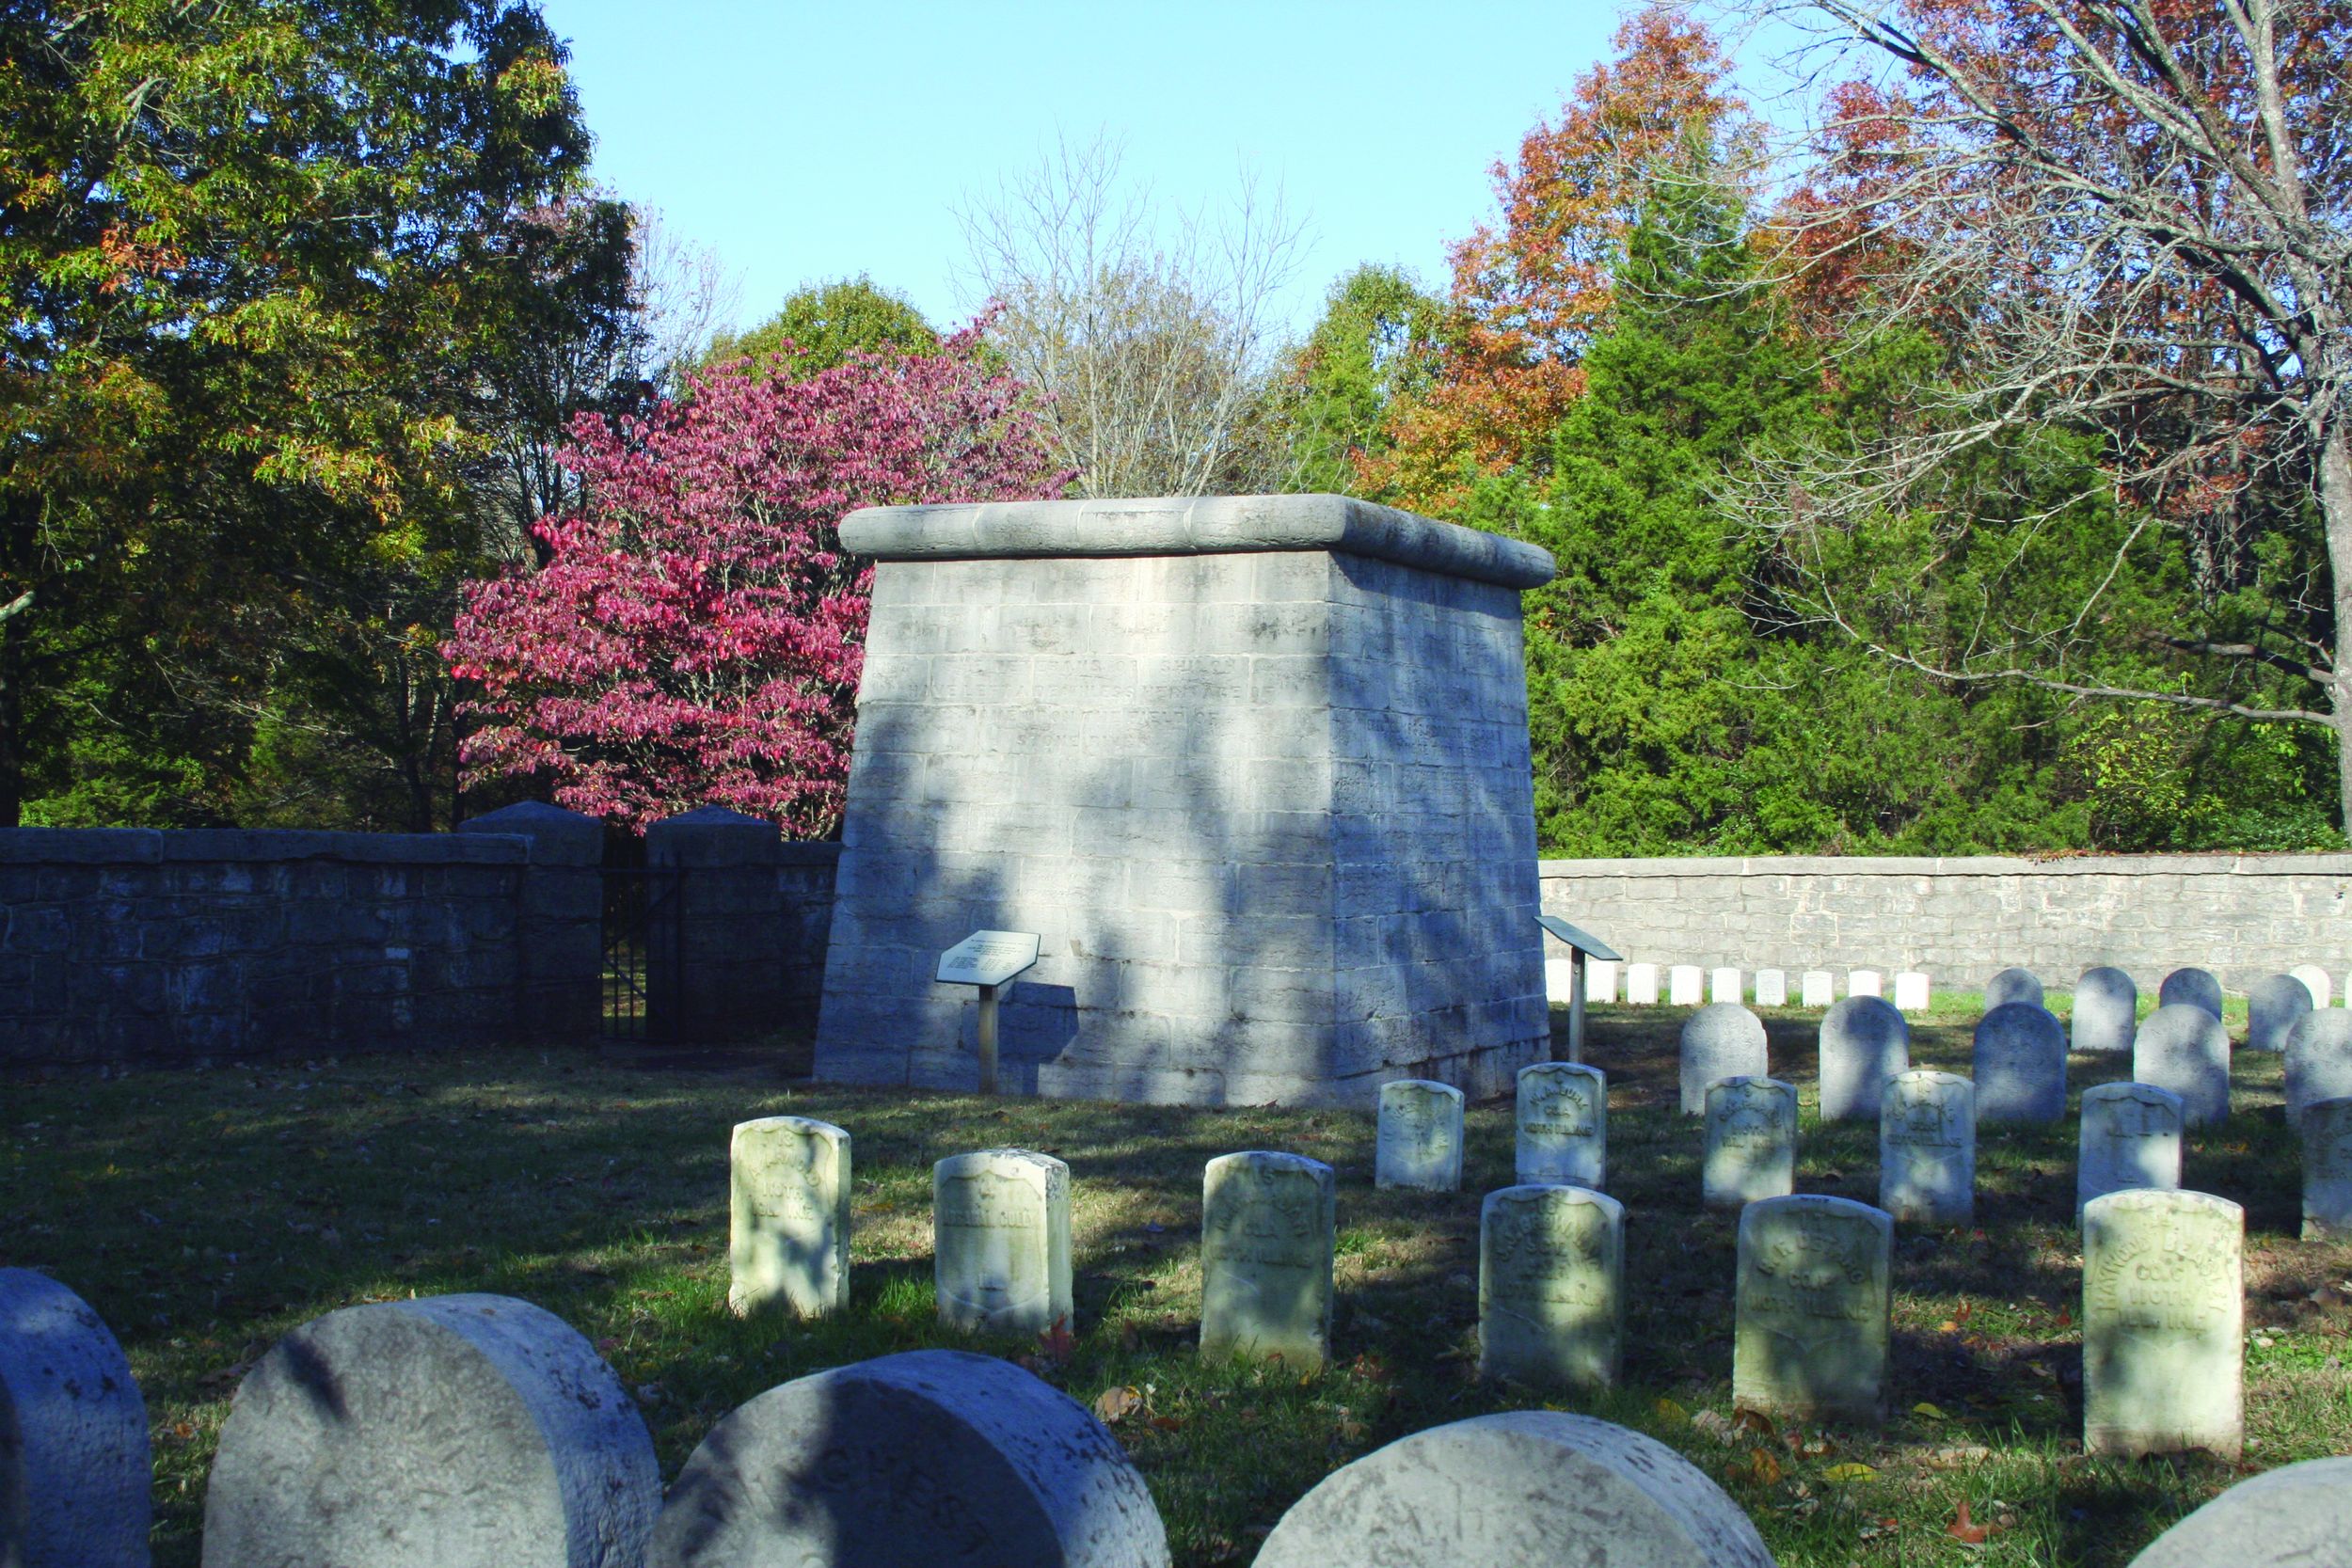 The limestone monument erected by members of Colonel William B. Hazen’s brigade is the nation’s oldest intact Civil War monument.